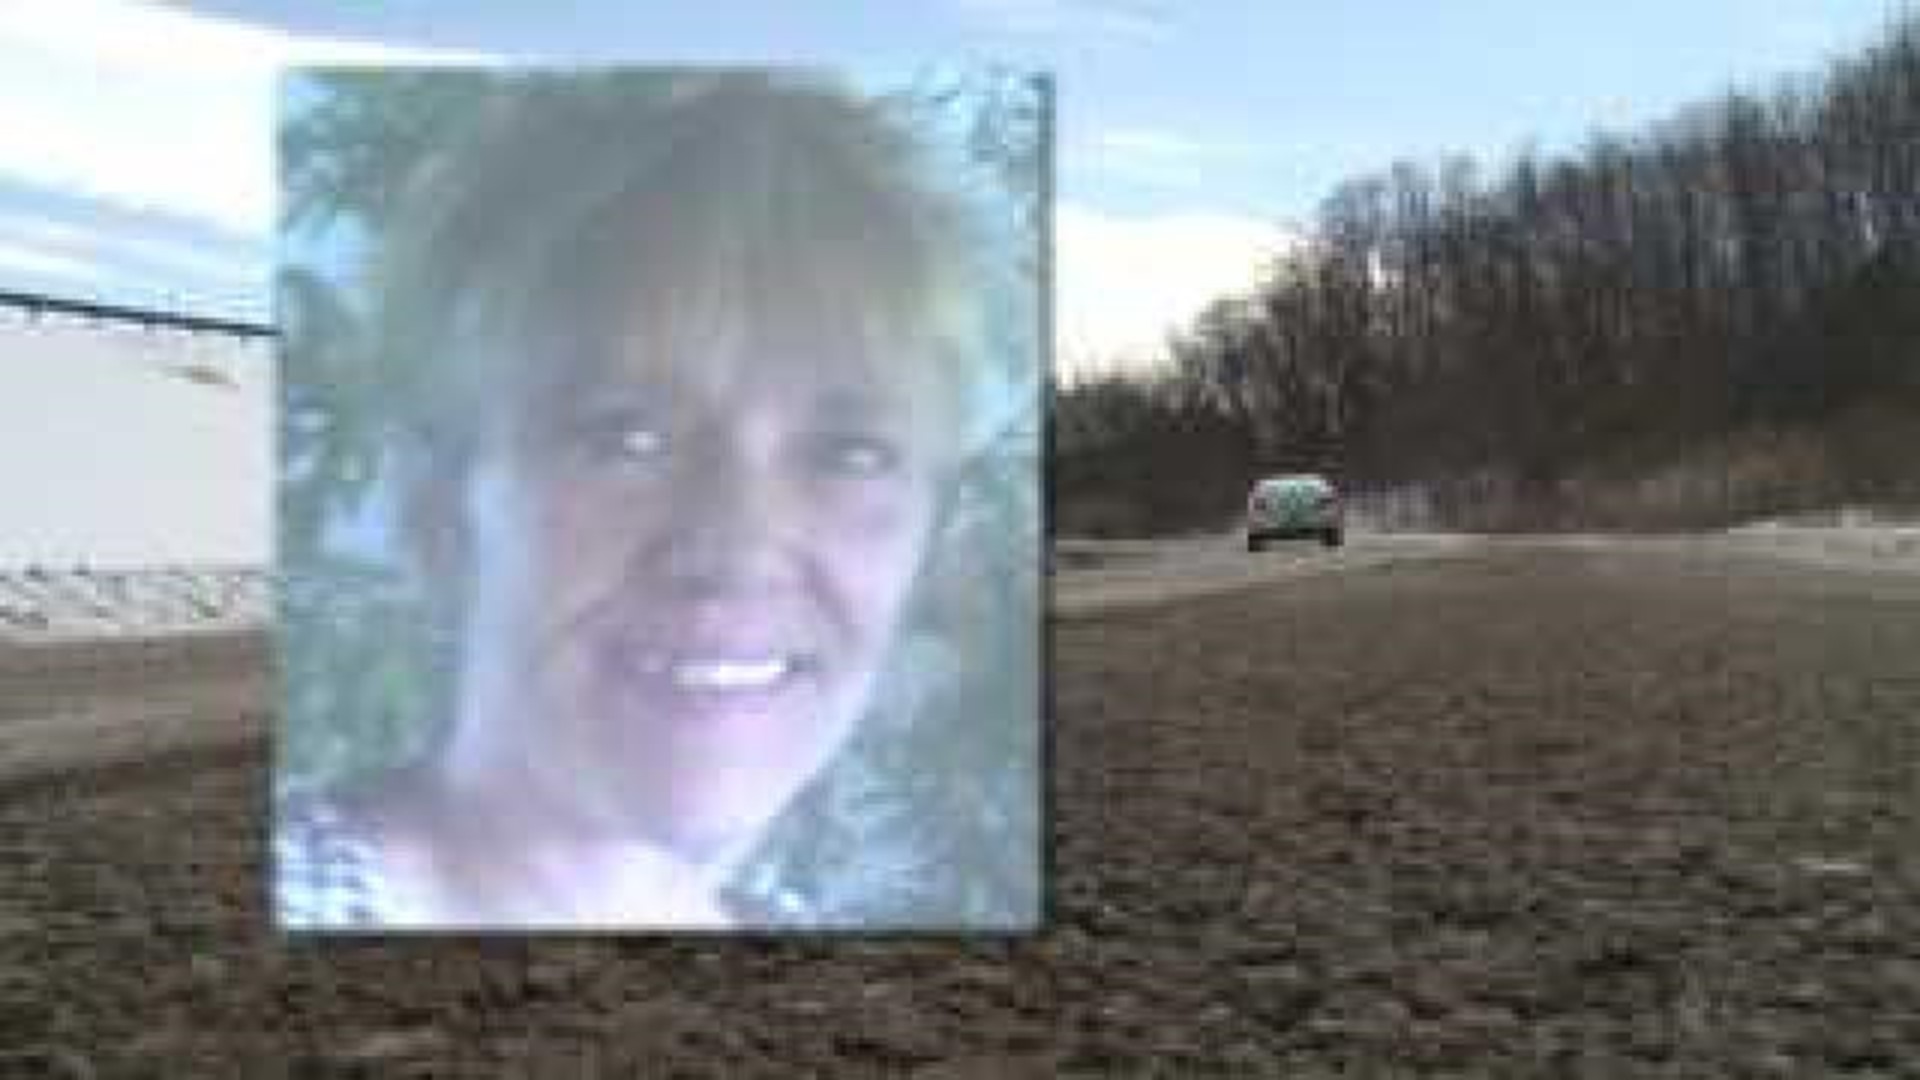 Family remembers Silvis woman killed by alleged drunk driver